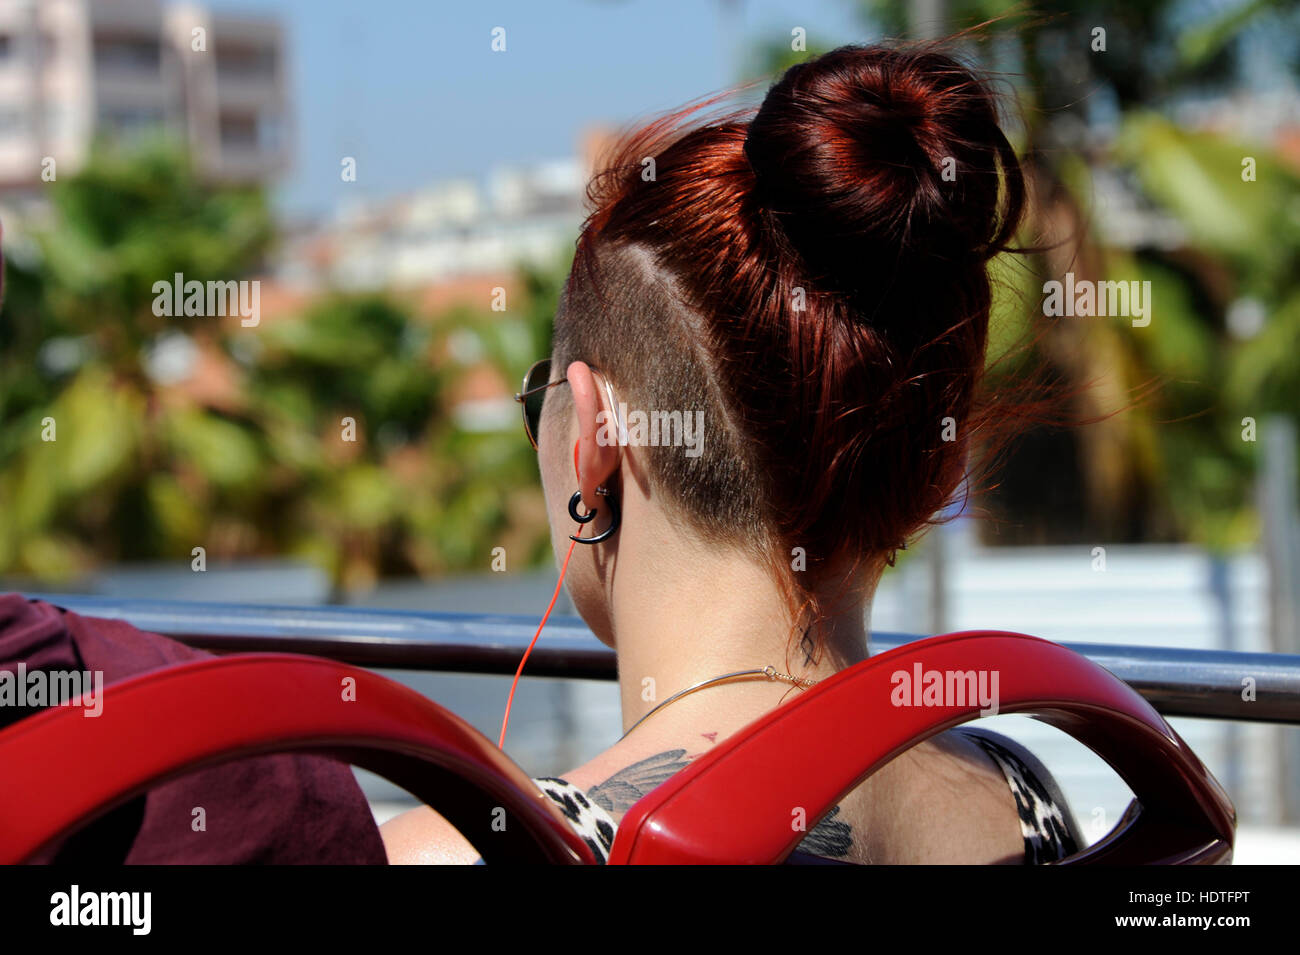 Bus tour with girl with red hair, Lisboa, Lisbon, Portugal Stock Photo